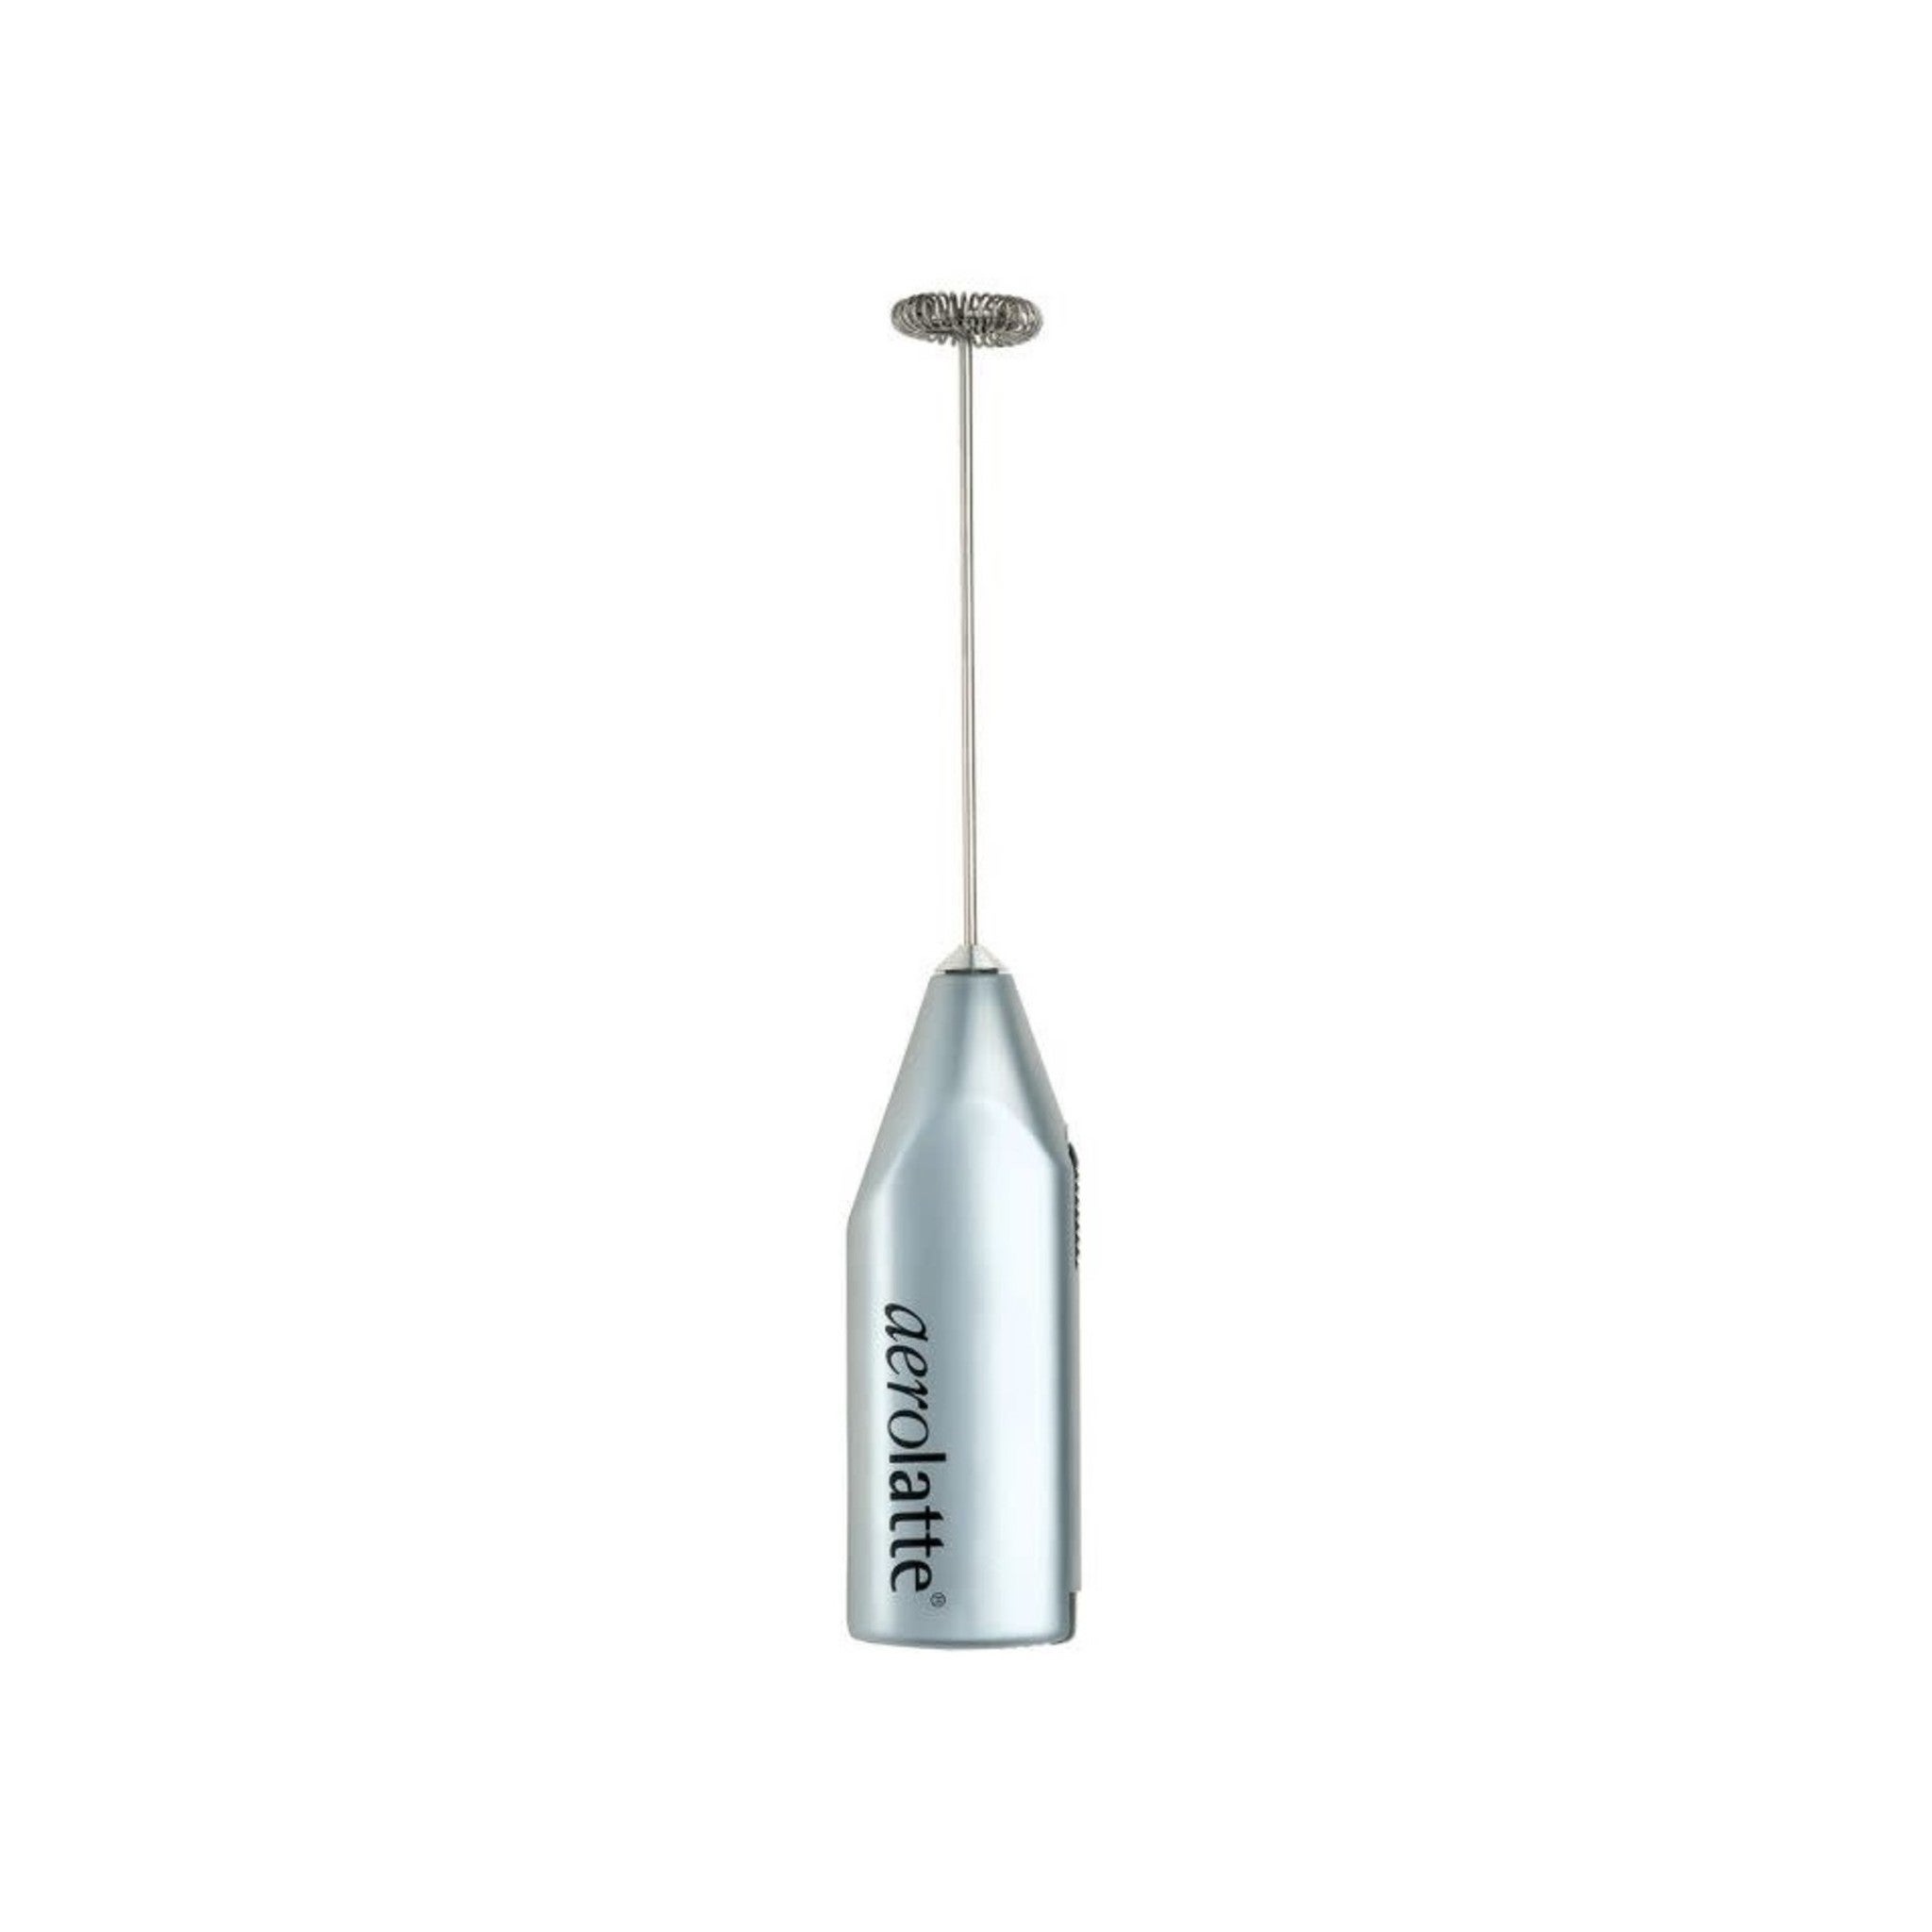 Golde Superwhisk by Golde - Dwell